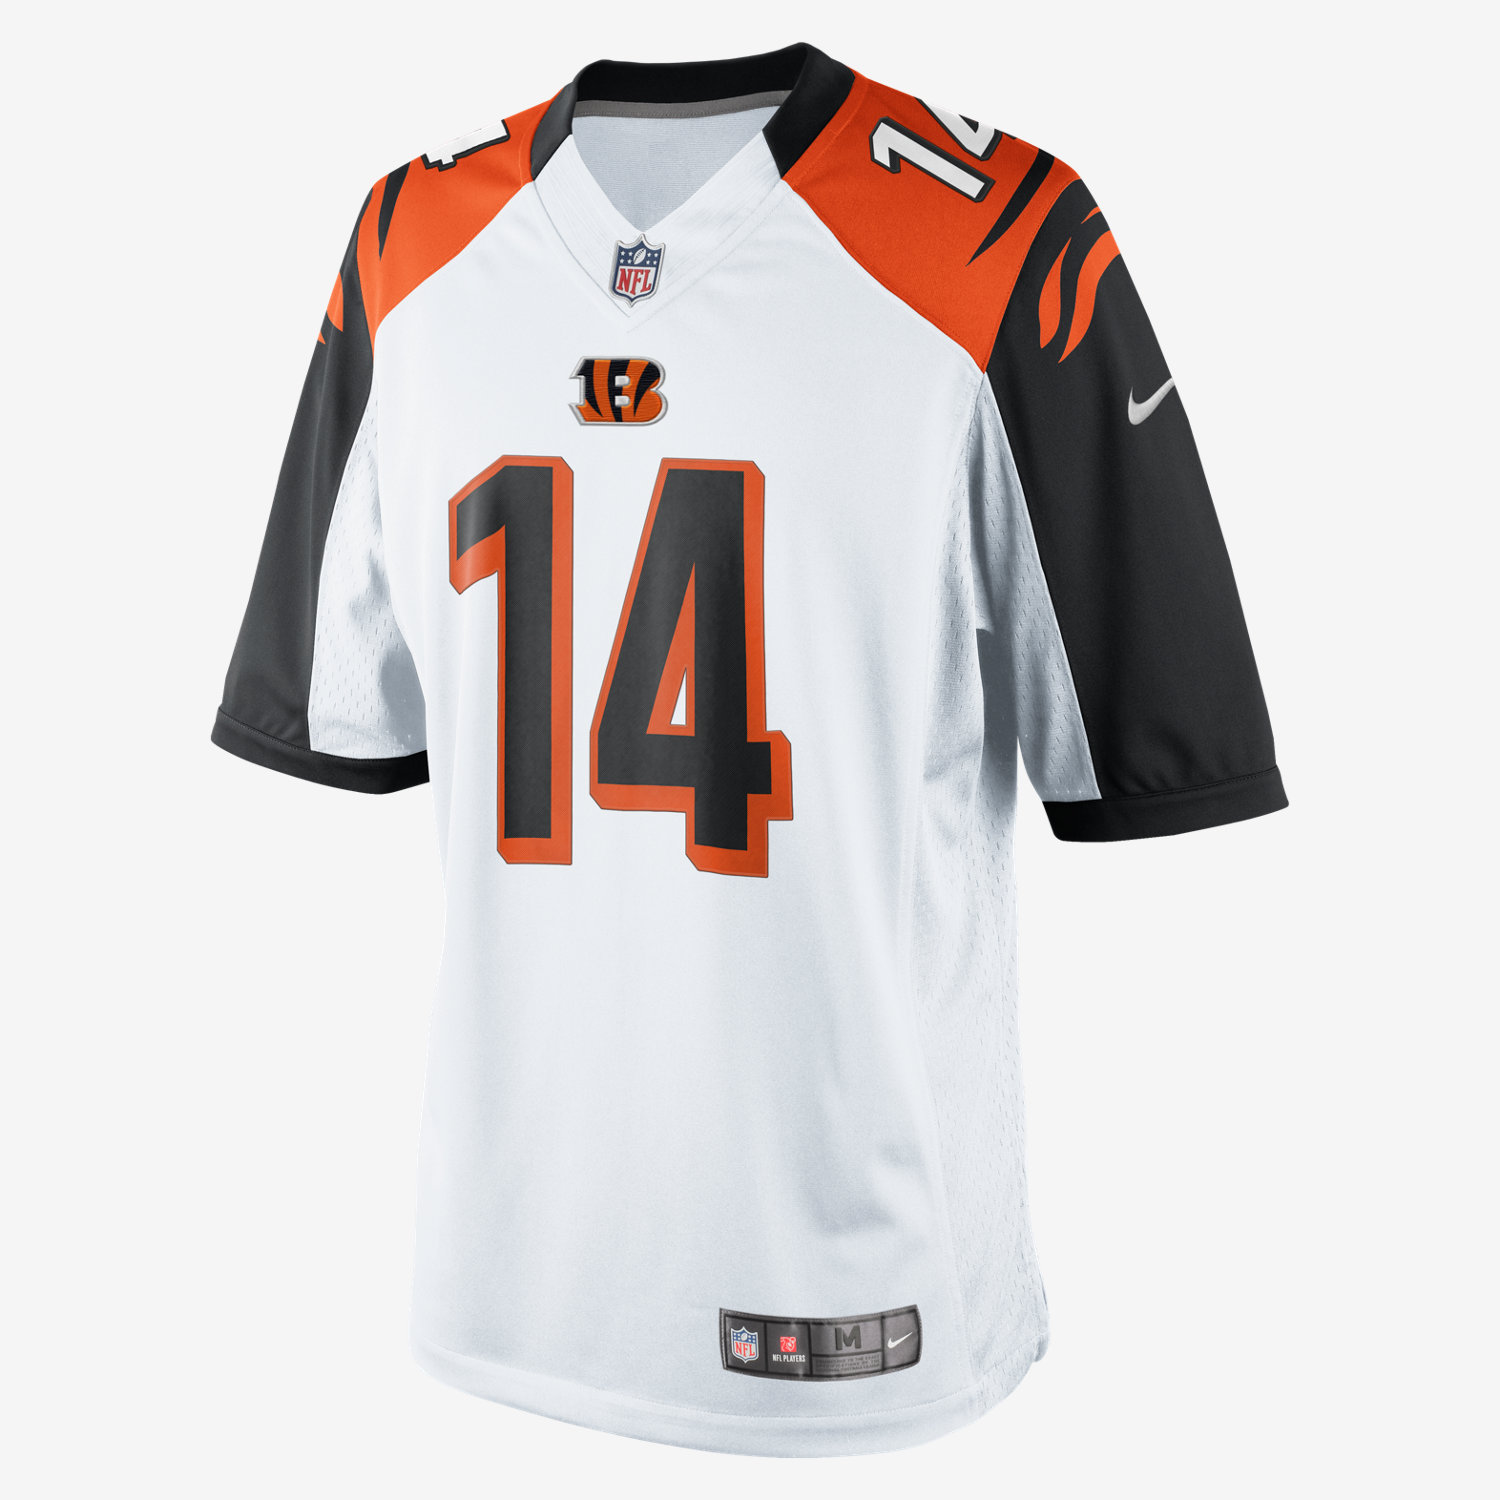 white and black bengals jersey